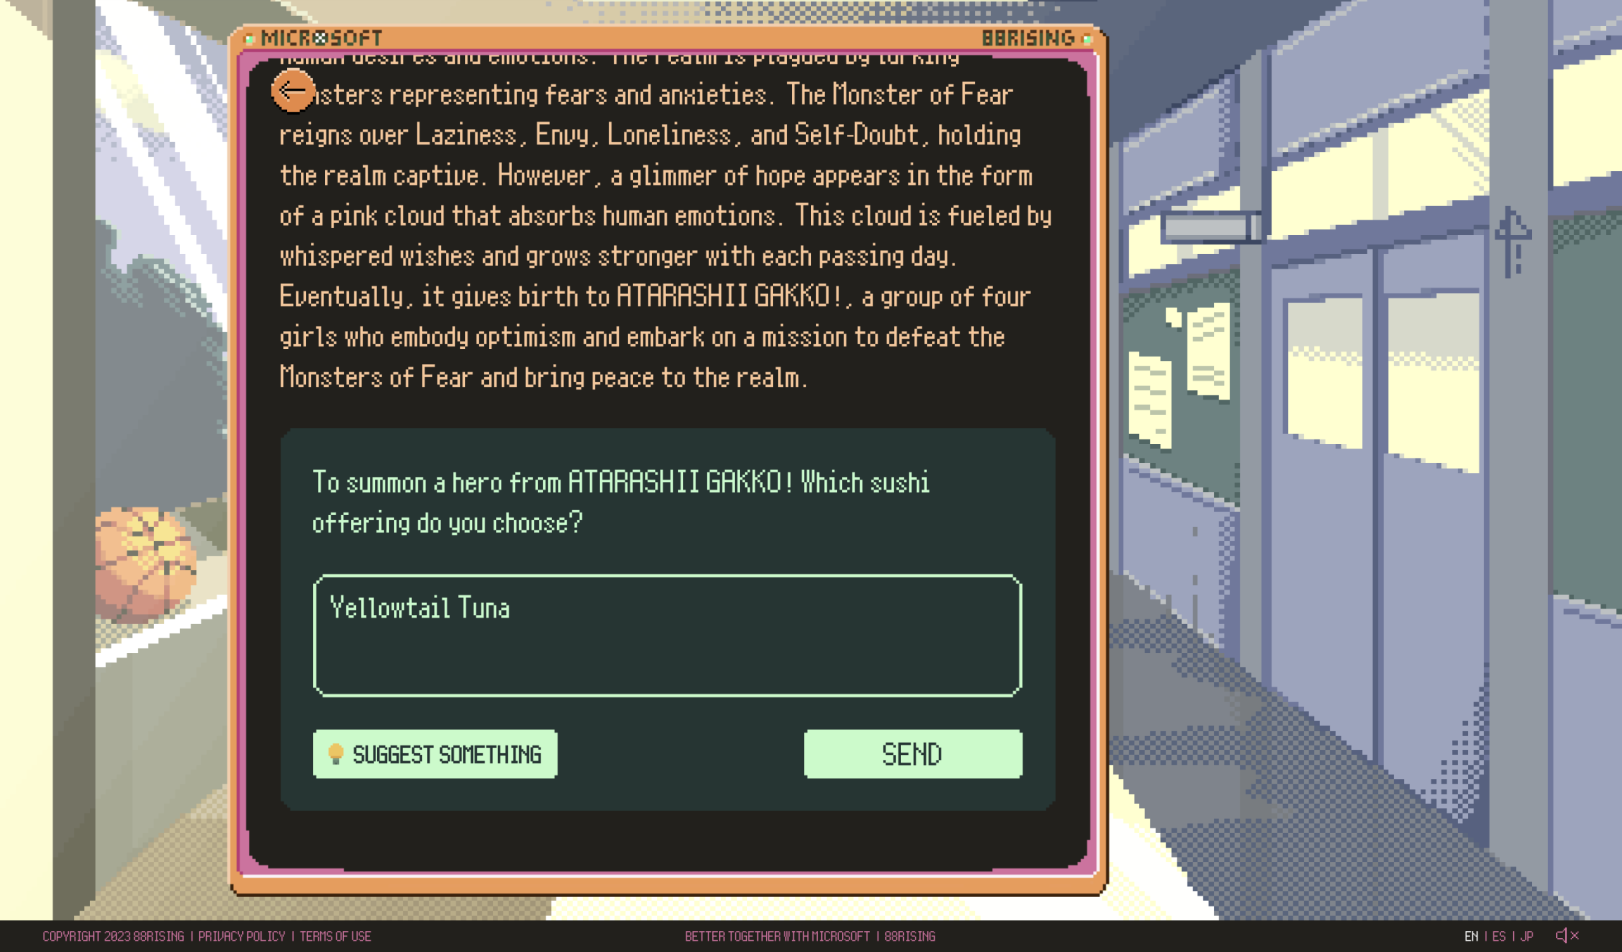 A screenshot of the experience showing a text box and a school hallway in the background.